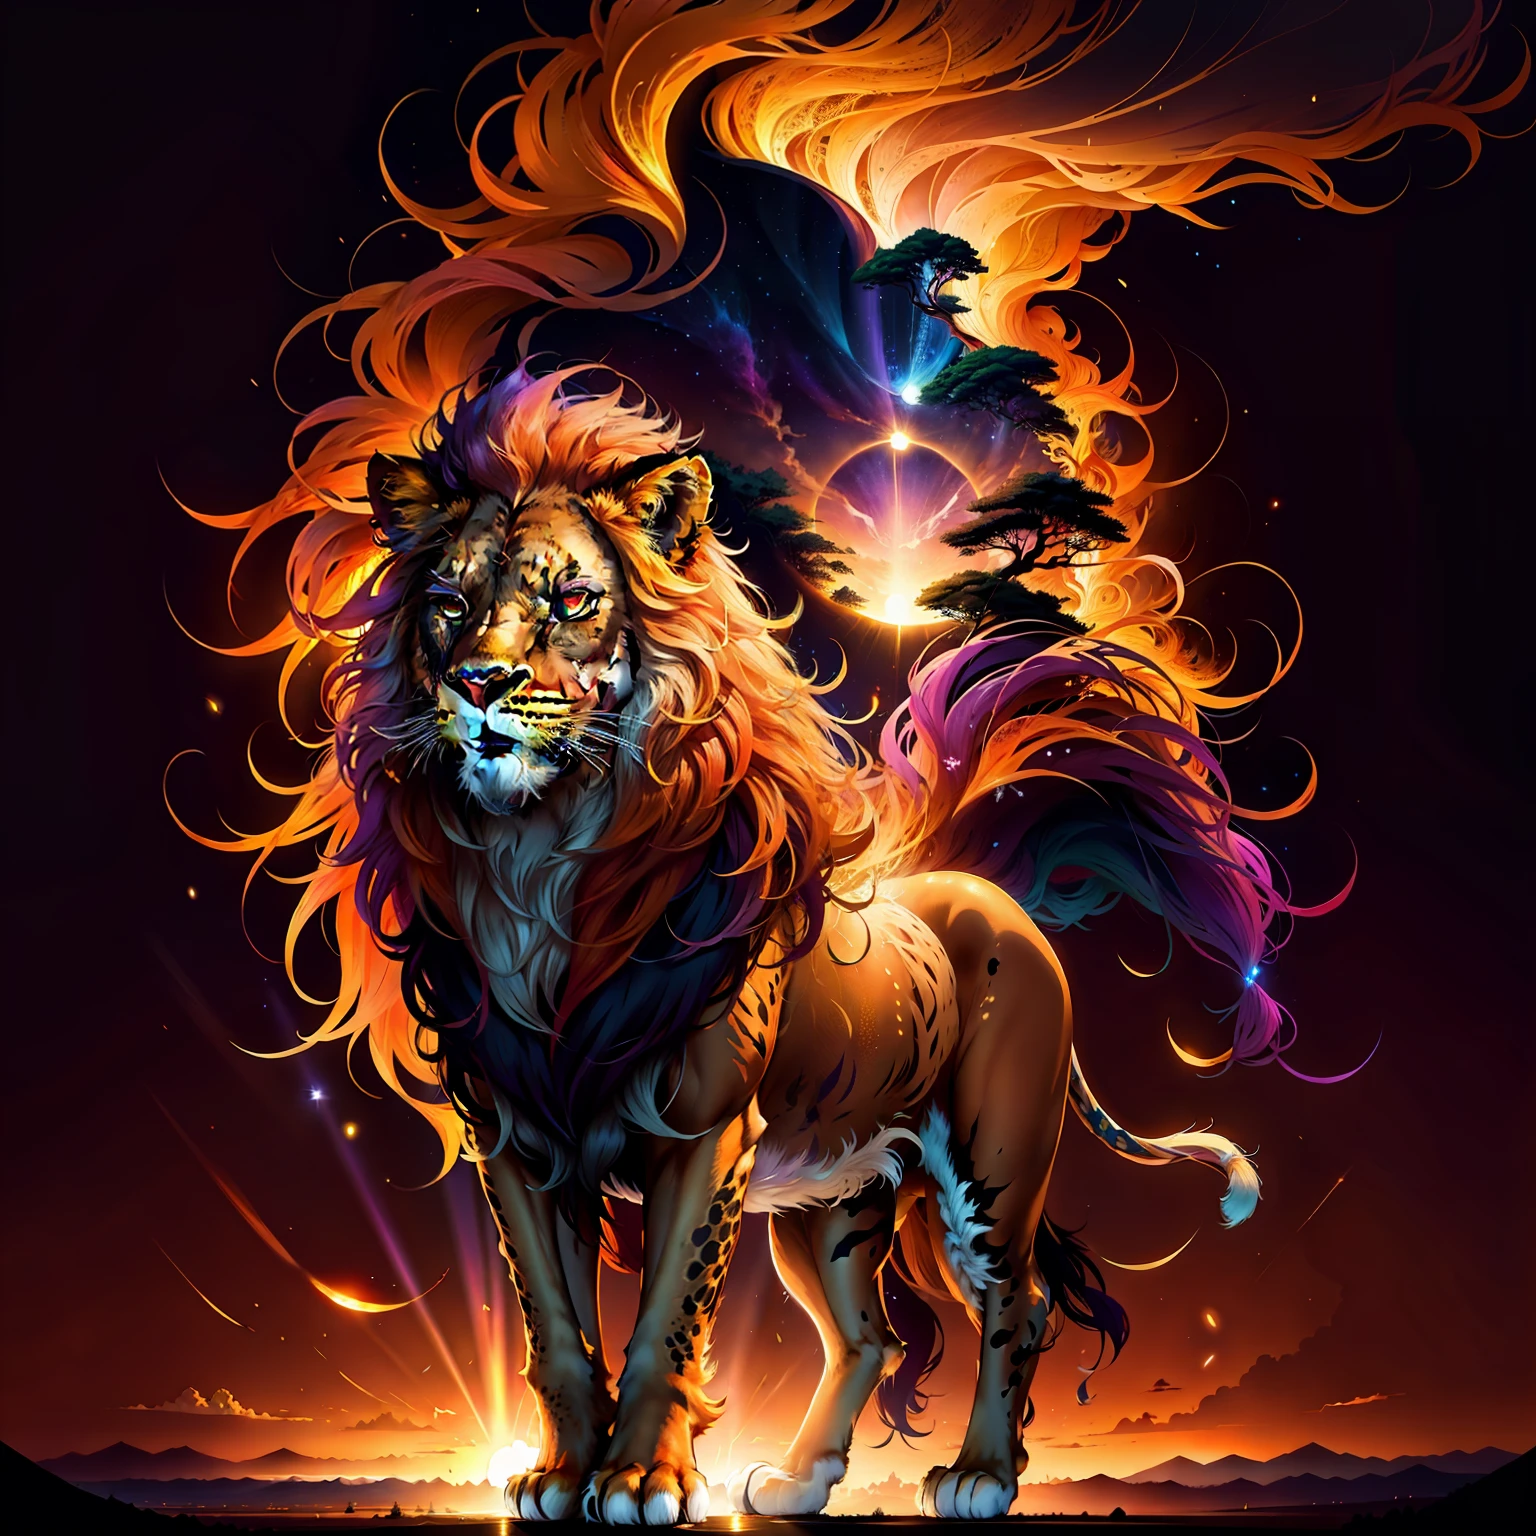 A majestic and majestic lion, His golden mane floating in the wind with overcast sky with beam of light illuminated the lion. From a distance, The setting sun paints the sky in shades of fiery orange and deep purple, casting a warm and welcoming glow on the African landscape.